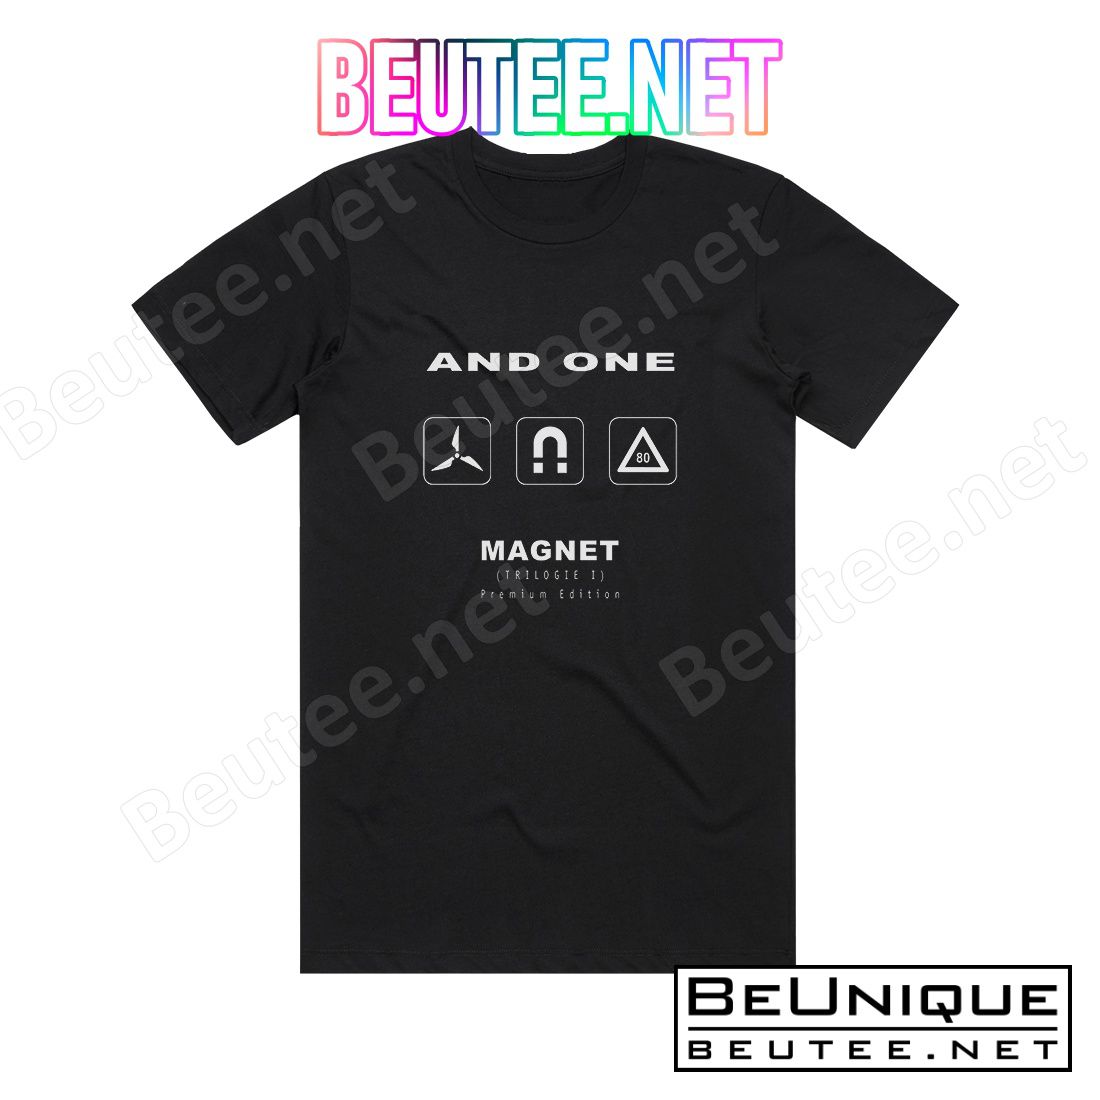 And One Magnet 5 Album Cover T-Shirt